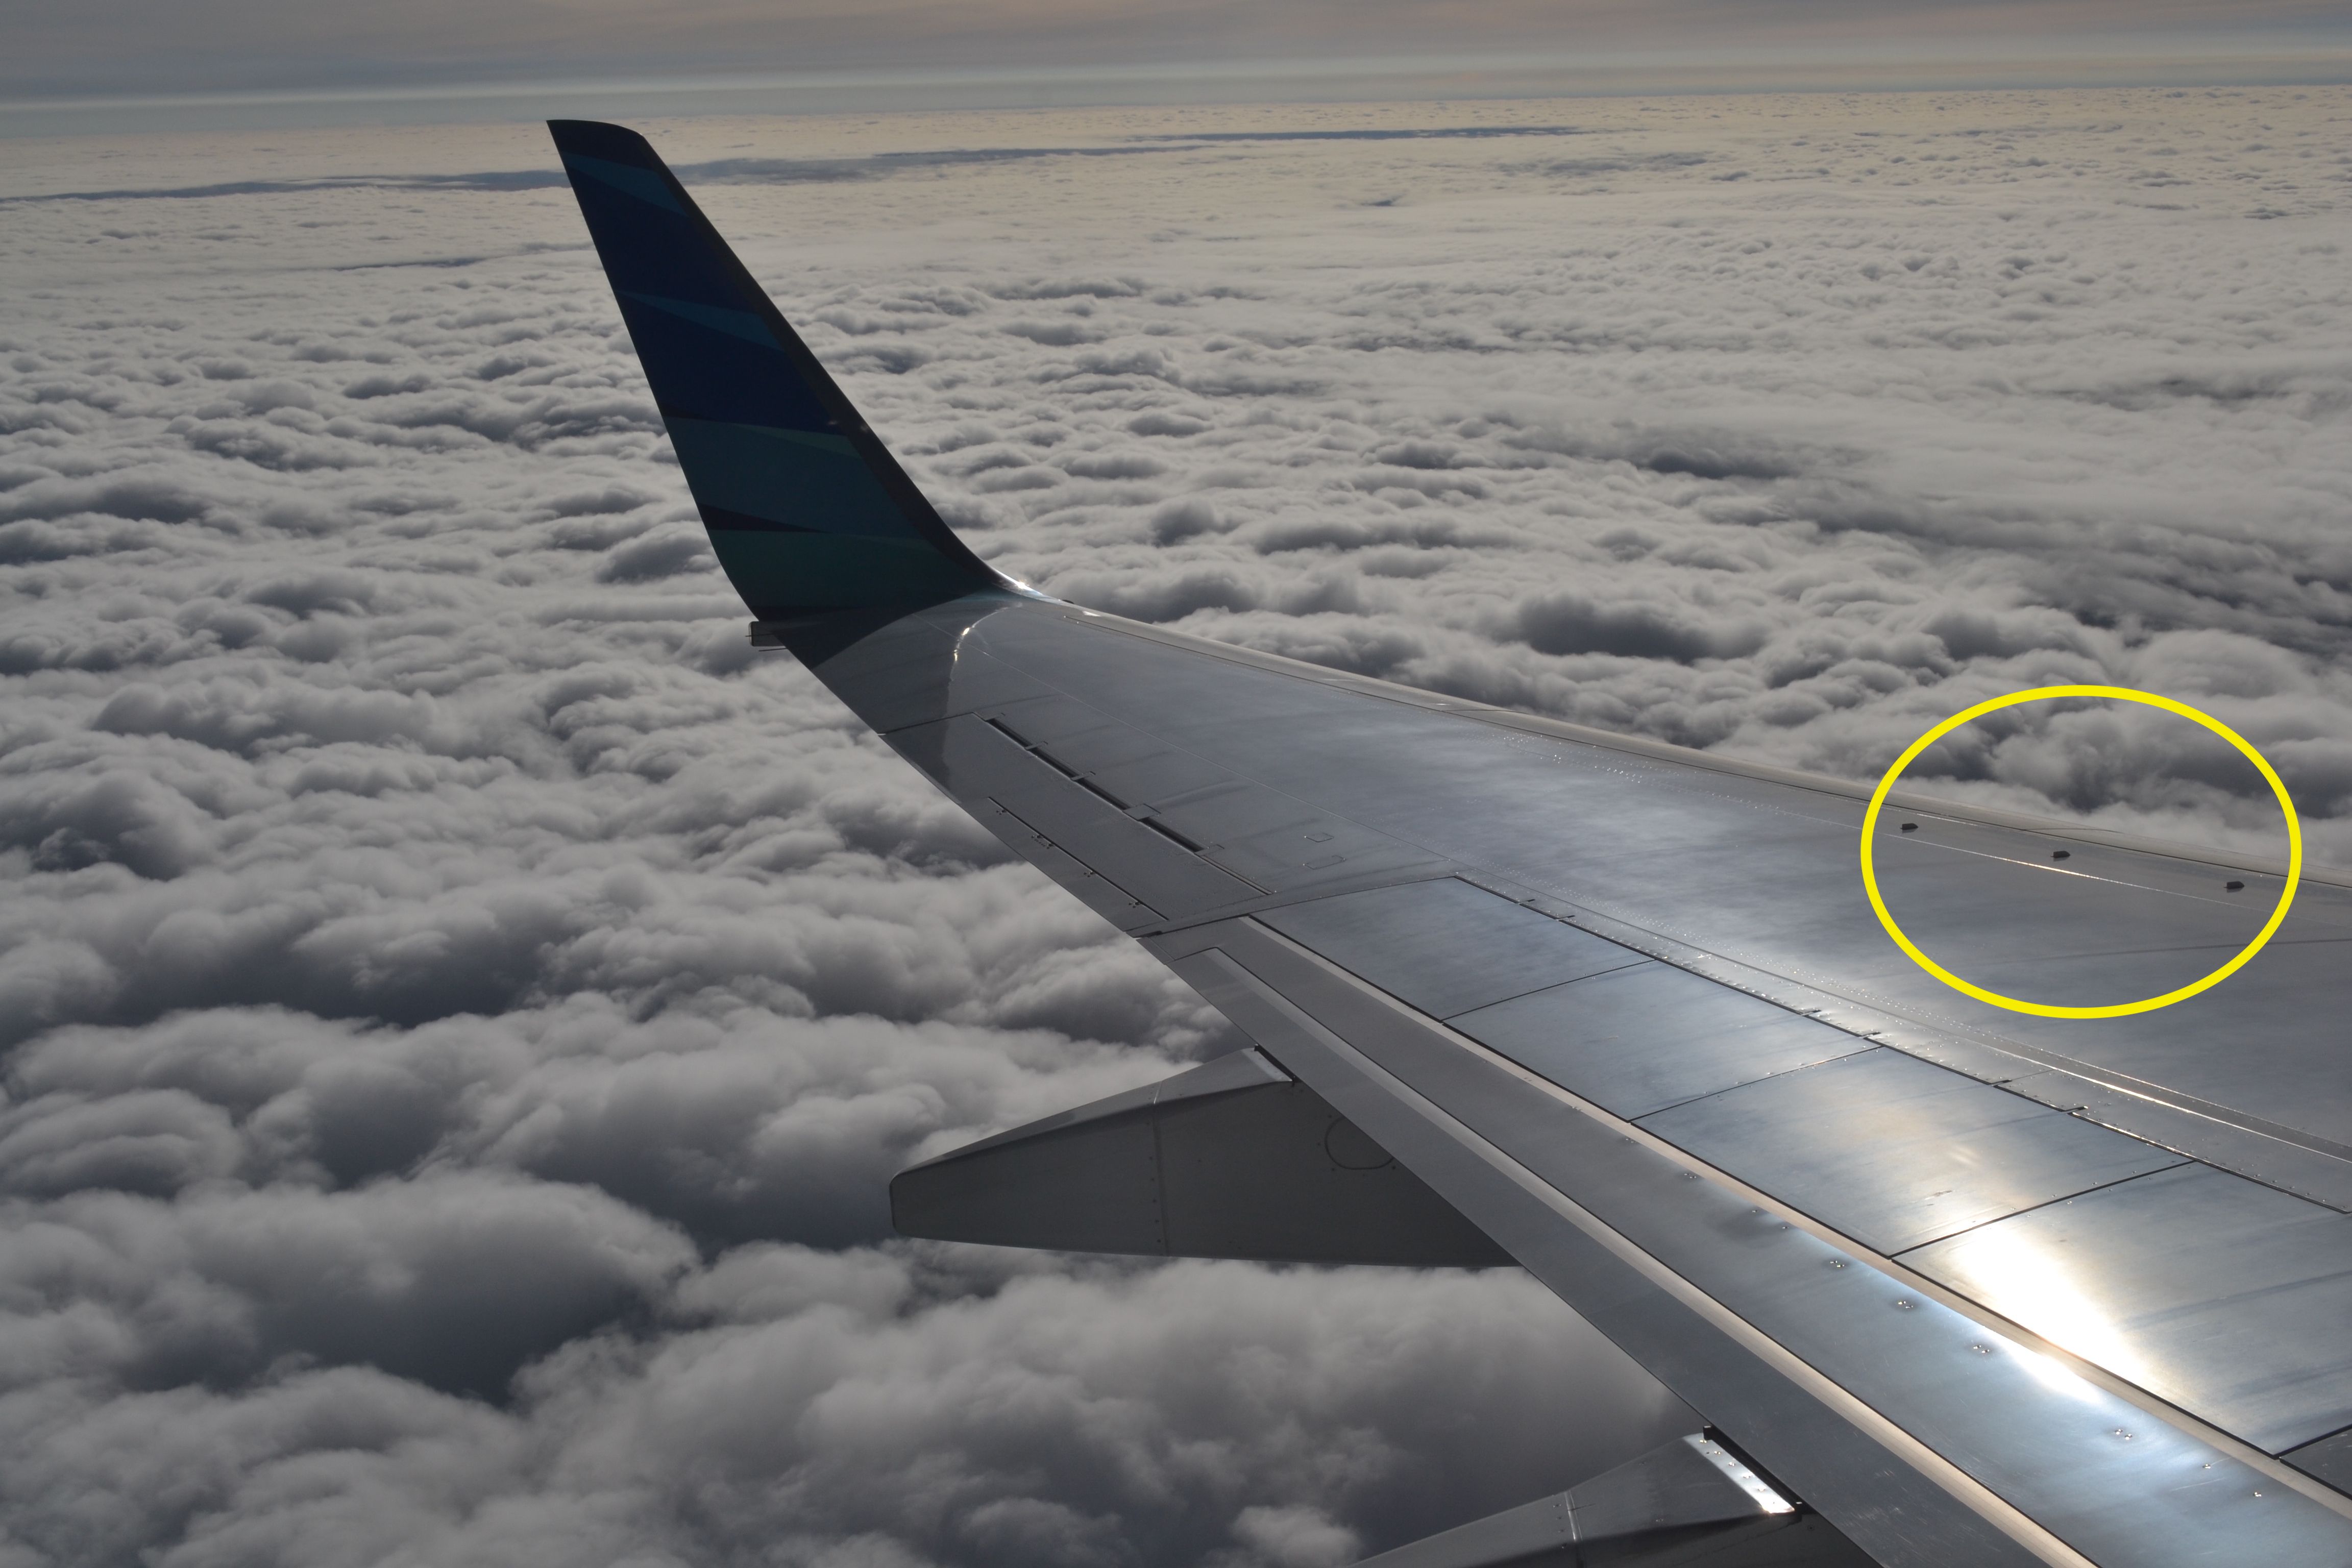 The wing of a Garuda Indonesia 737 in the sky